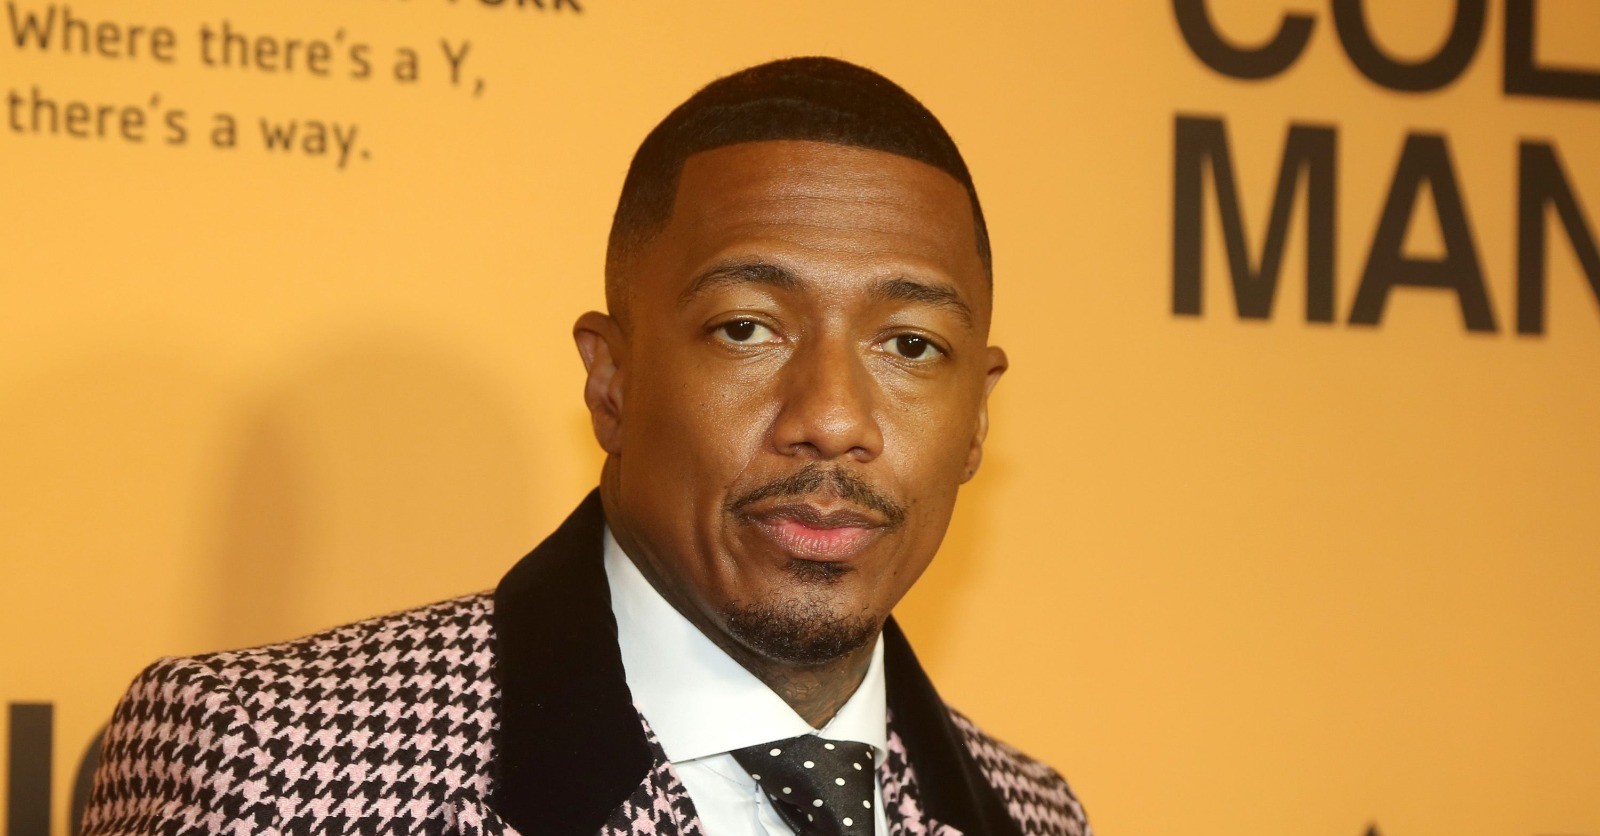 Nick Cannon says ‘God decides’ when he will stop having children